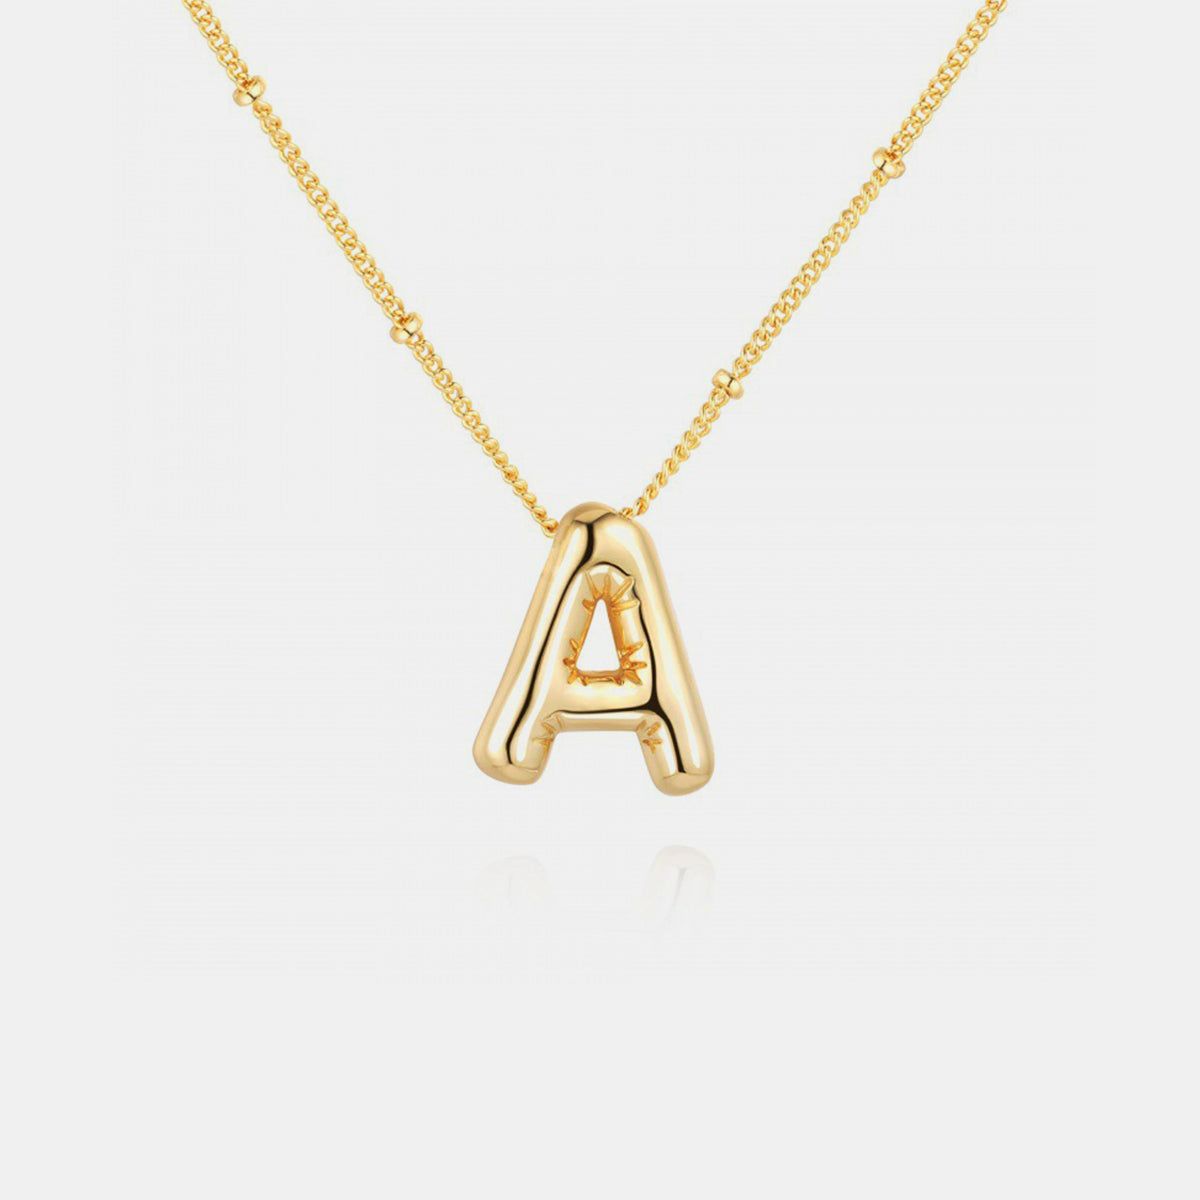 TEEK - A-J Gold-Plated Letter Necklace JEWELRY TEEK Trend Style A  